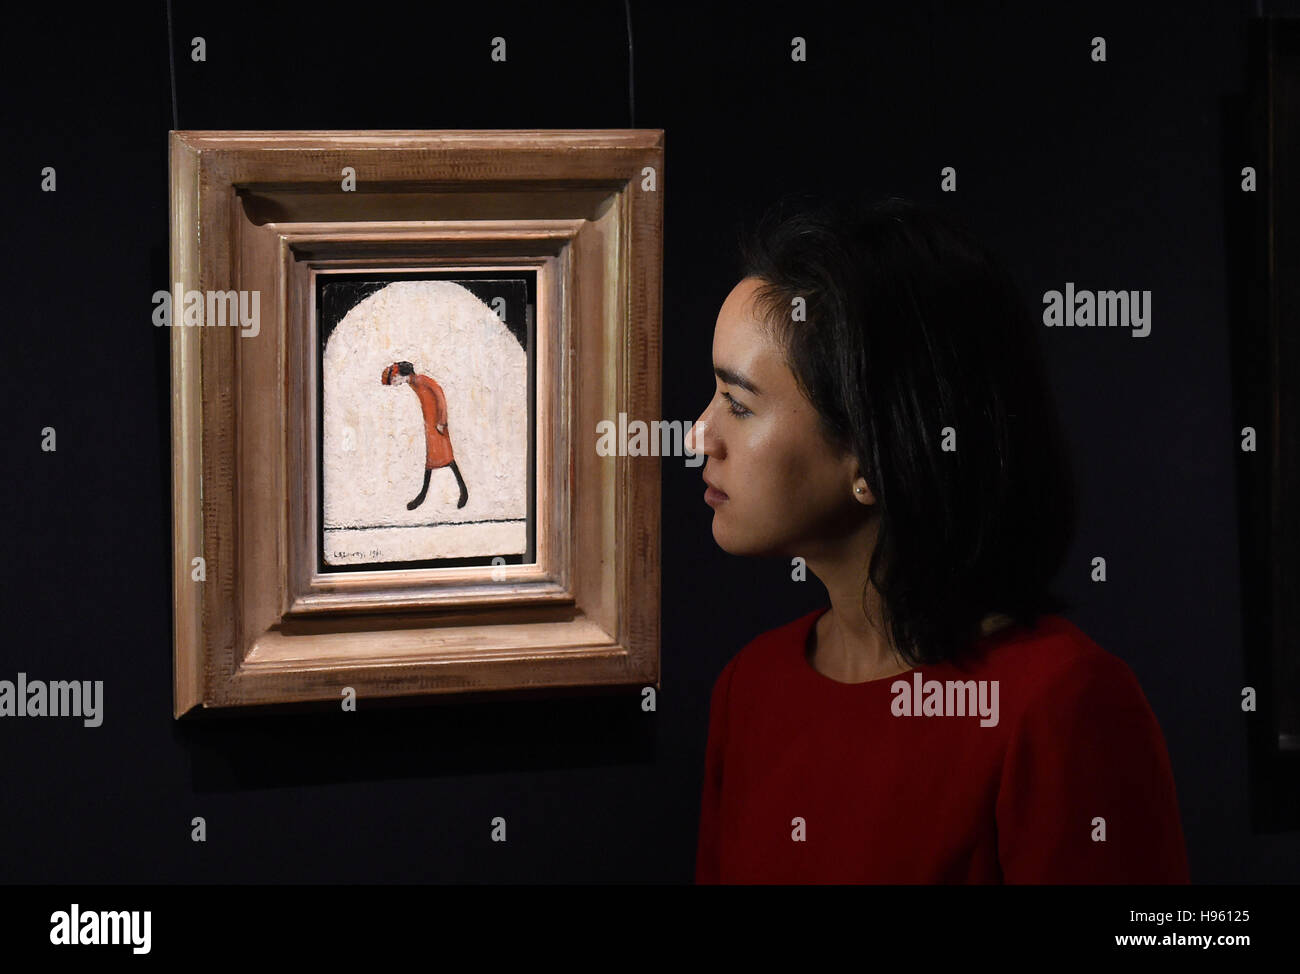 Staff at Sotheby's, London, stand next to a painting titled Woman In Red, 1961, by Laurence Stephen Lowry in the Modern & Post-War British Art section and estimated at £60,000 - £80,000, which makes up part of Sotheby's forthcoming National Treasures auctions. Stock Photo